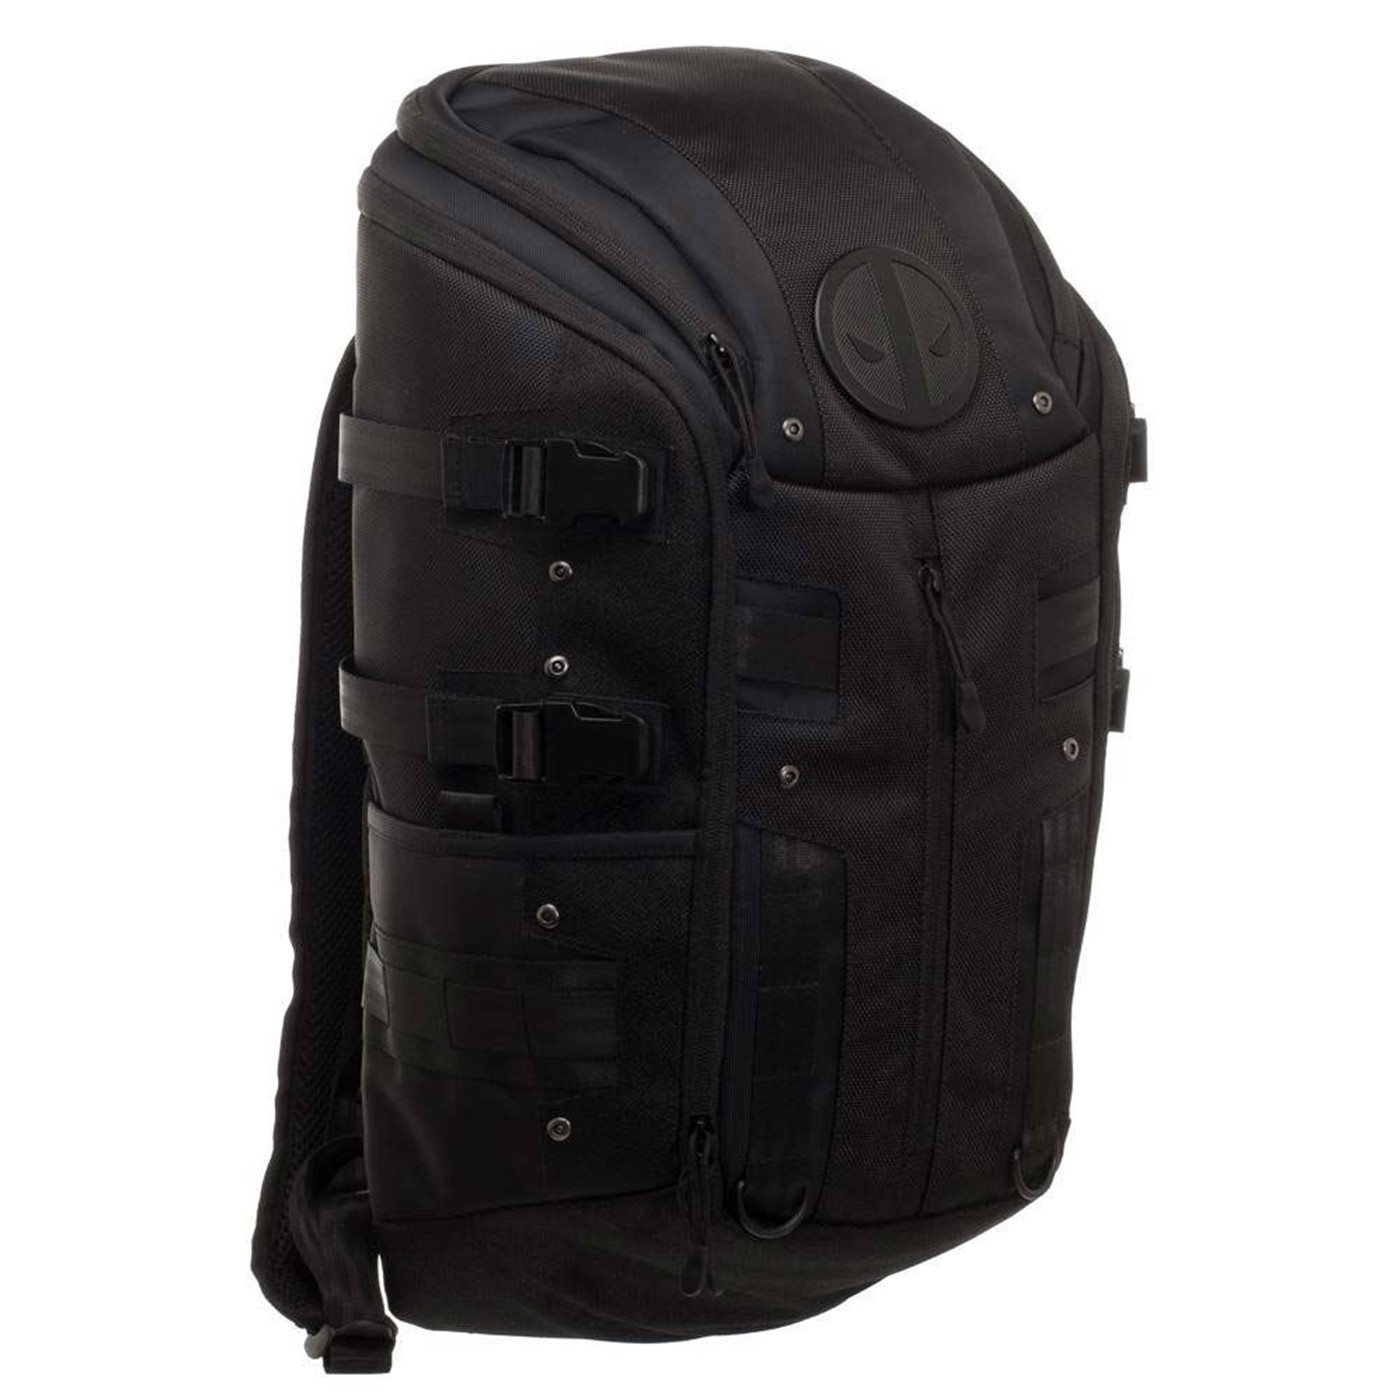 Deadpool Tactical Backpack - image 3 of 4